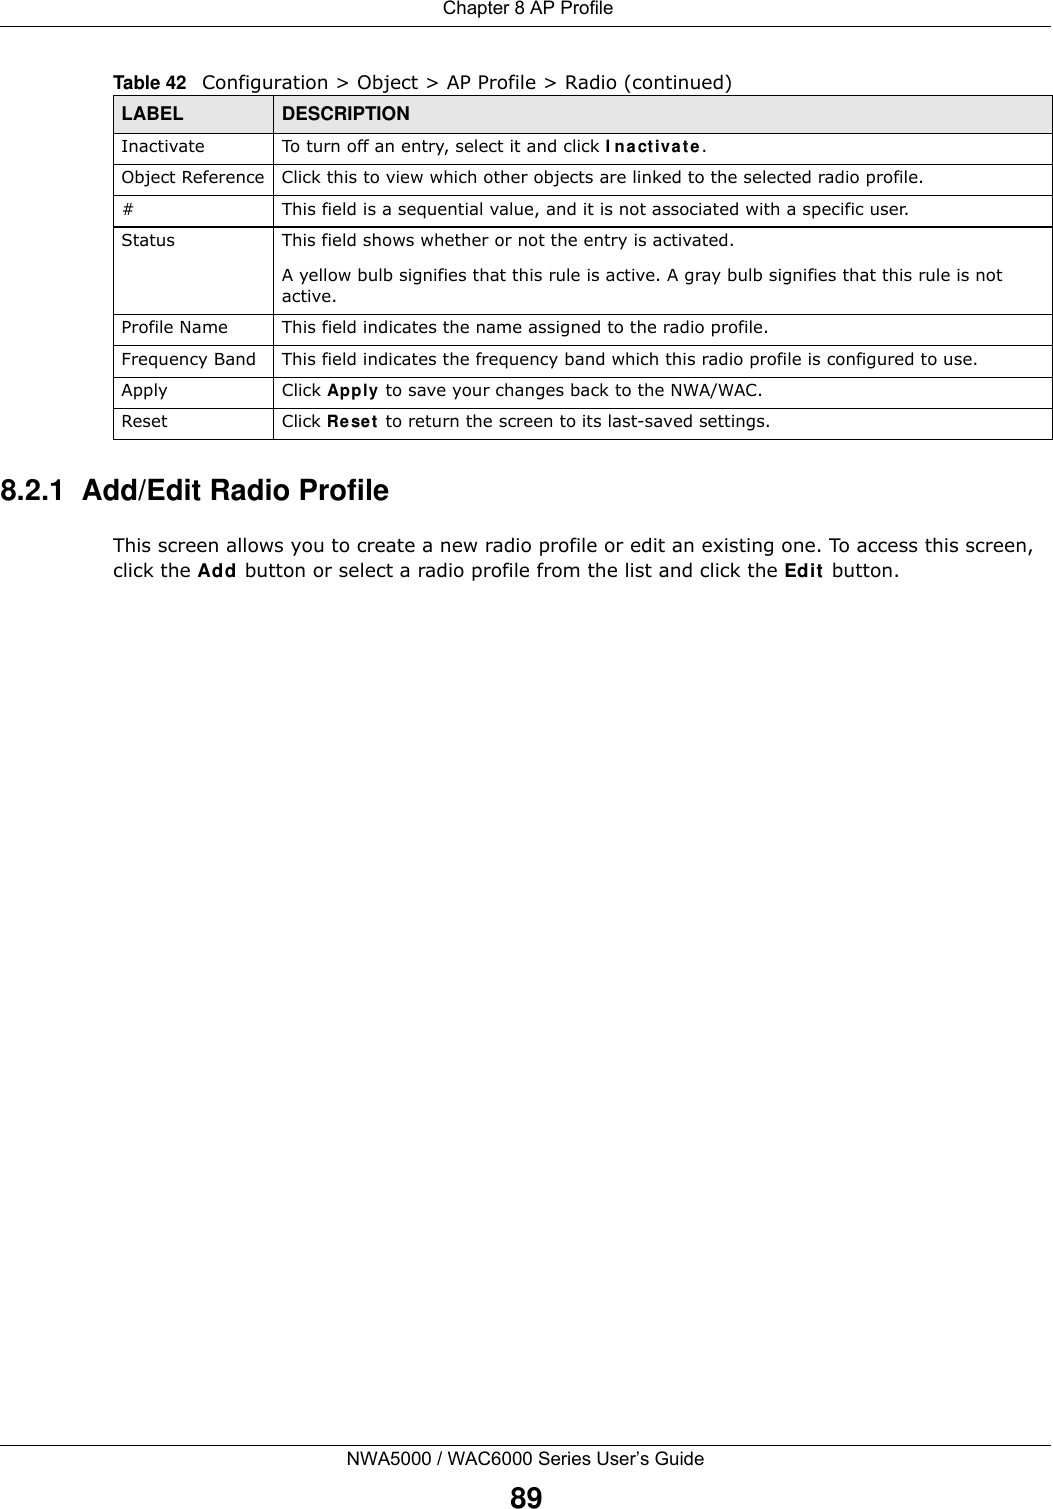  Chapter 8 AP ProfileNWA5000 / WAC6000 Series User’s Guide898.2.1  Add/Edit Radio ProfileThis screen allows you to create a new radio profile or edit an existing one. To access this screen, click the Add button or select a radio profile from the list and click the Edit  button. Inactivate To turn off an entry, select it and click I n a ct iva t e .Object Reference Click this to view which other objects are linked to the selected radio profile.# This field is a sequential value, and it is not associated with a specific user.Status This field shows whether or not the entry is activated.A yellow bulb signifies that this rule is active. A gray bulb signifies that this rule is not active.Profile Name This field indicates the name assigned to the radio profile.Frequency Band This field indicates the frequency band which this radio profile is configured to use.Apply Click Apply to save your changes back to the NWA/WAC.Reset Click Re se t  to return the screen to its last-saved settings.Table 42   Configuration &gt; Object &gt; AP Profile &gt; Radio (continued)LABEL DESCRIPTION